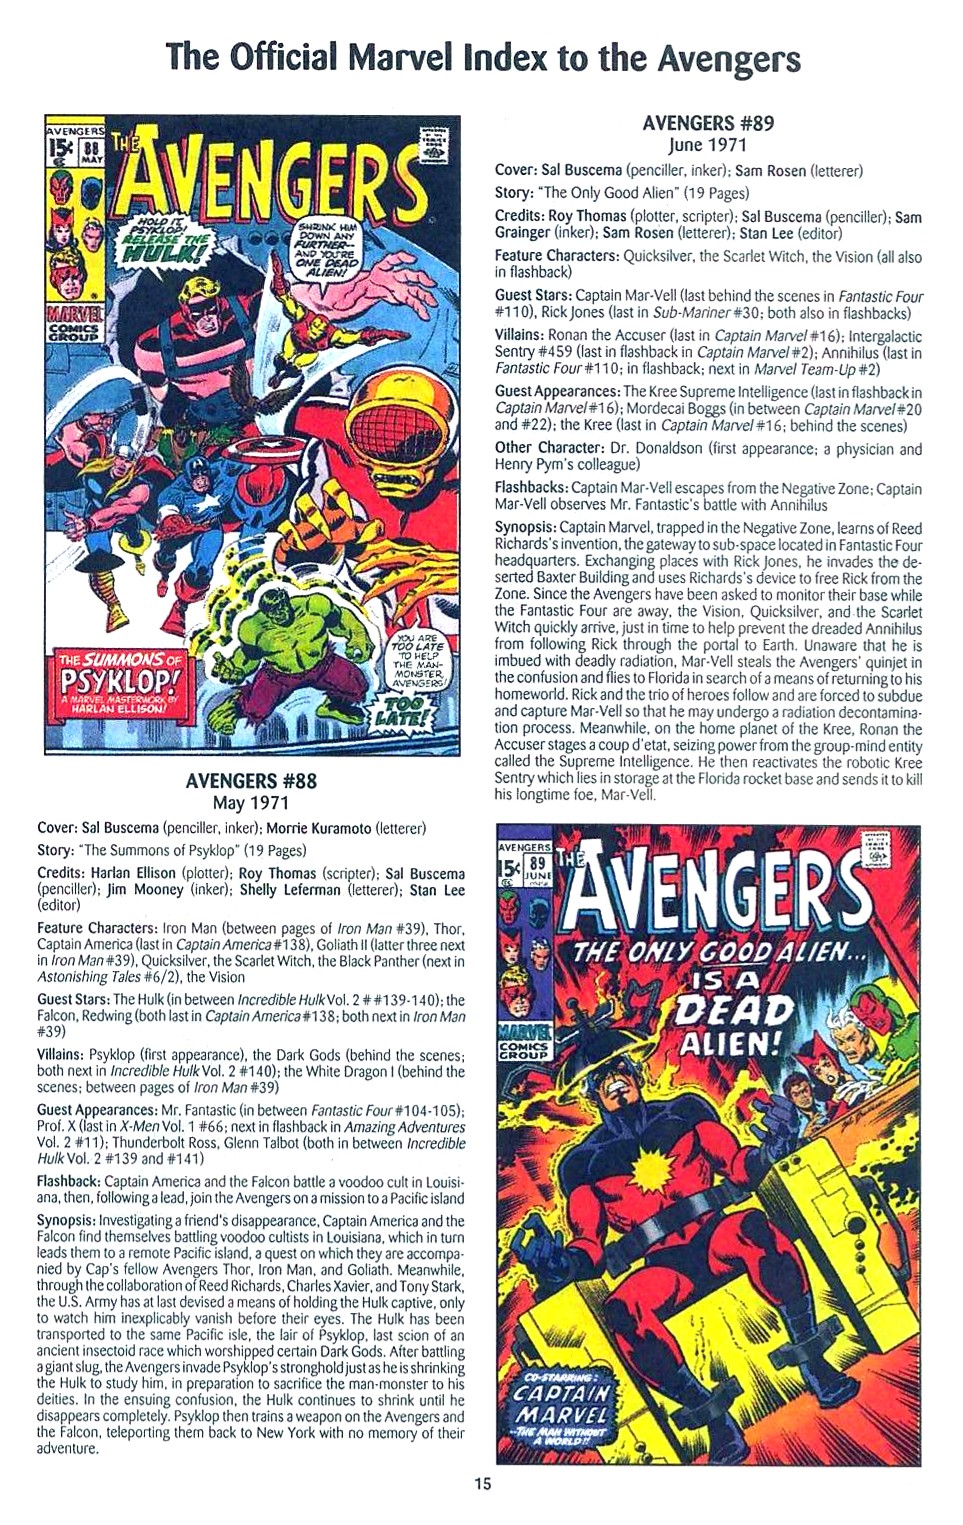 Read online The Official Marvel Index to the Avengers comic -  Issue #2 - 17